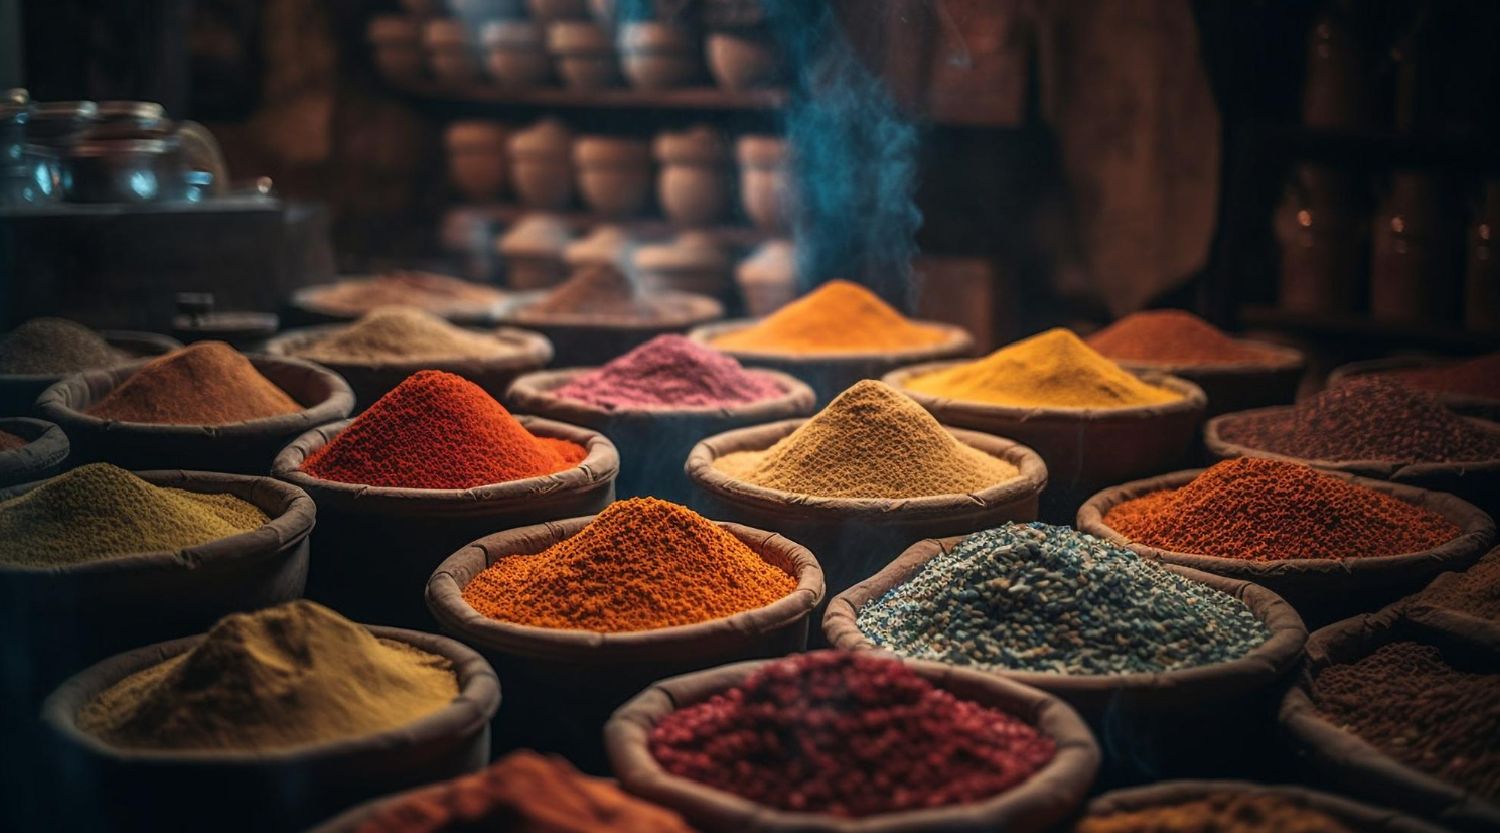 Golden Spices: How to distinguish a good quality spice